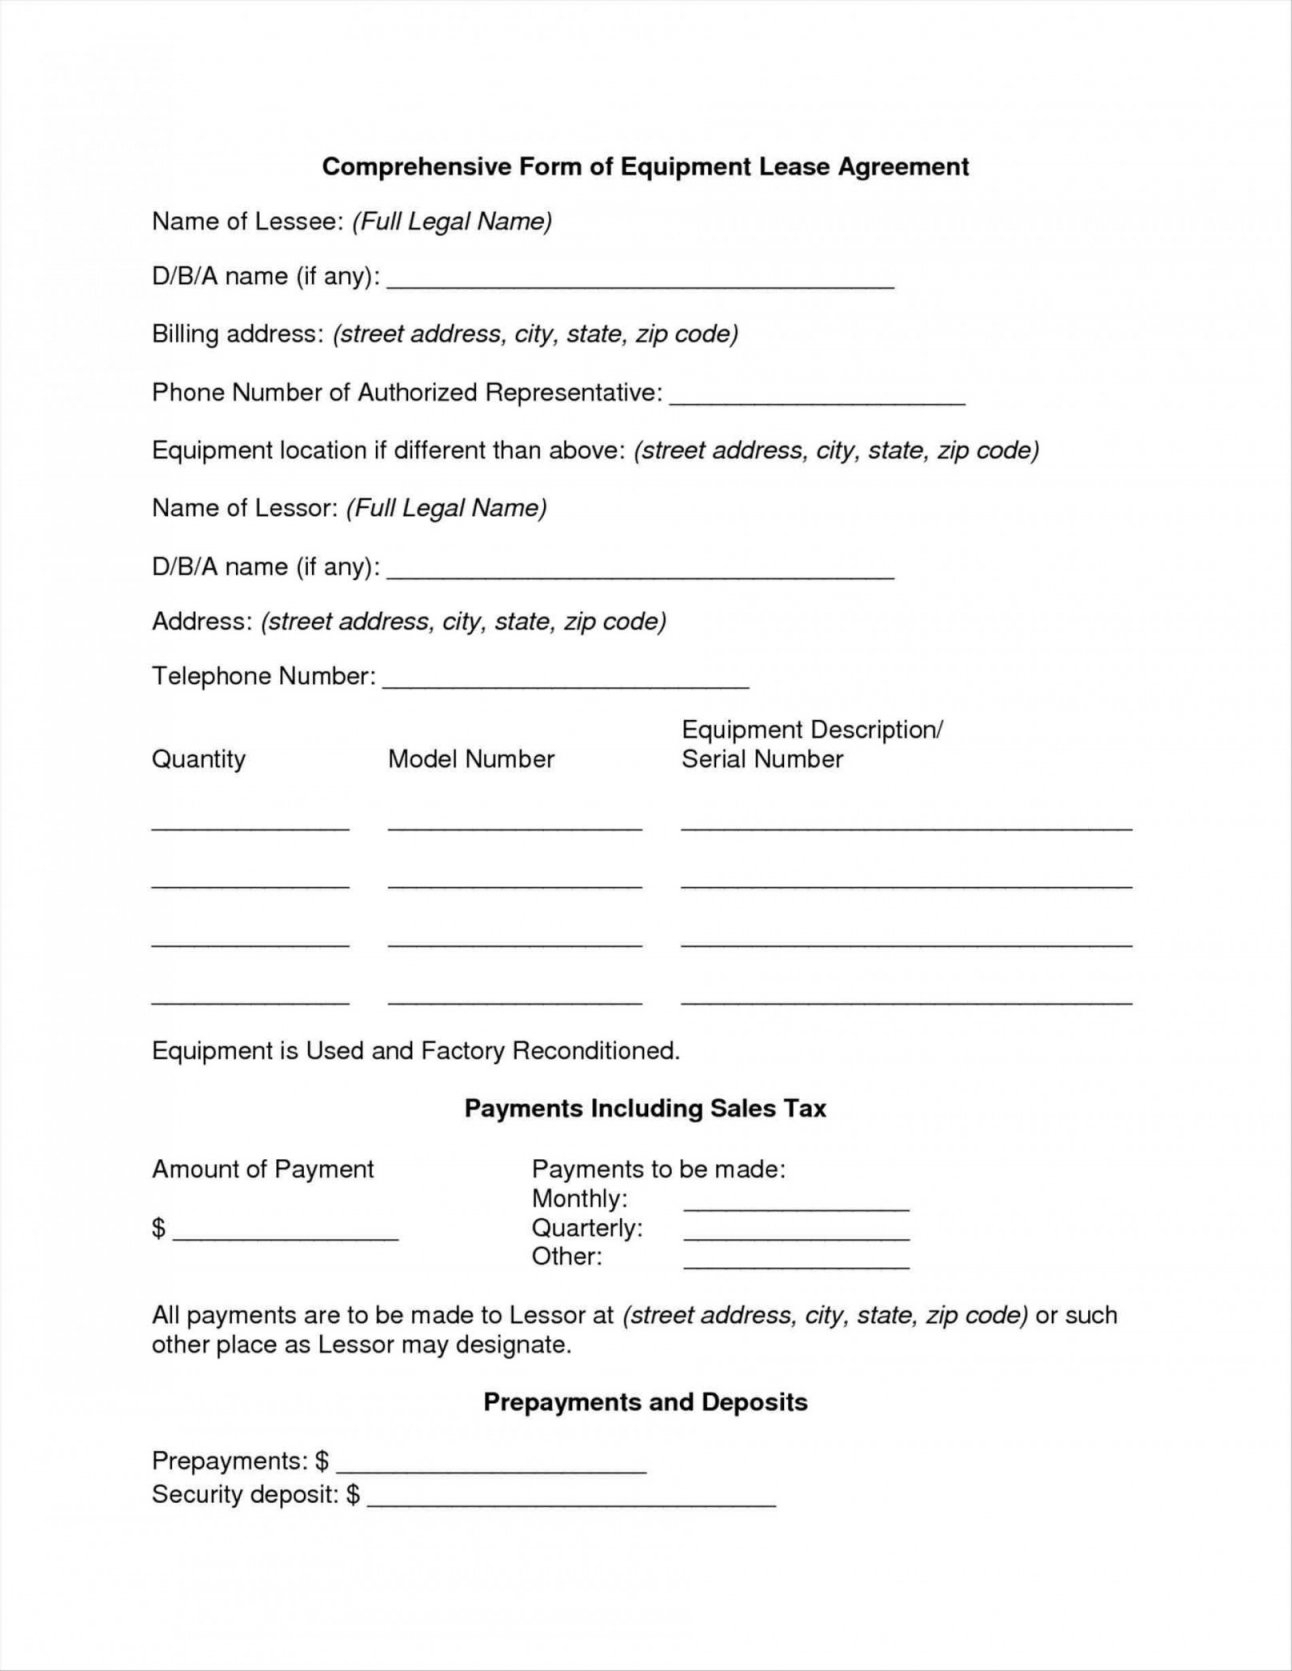 Free Motor Vehicle Lease Agreement Template | Backmentor - Free Printable Vehicle Lease Agreement